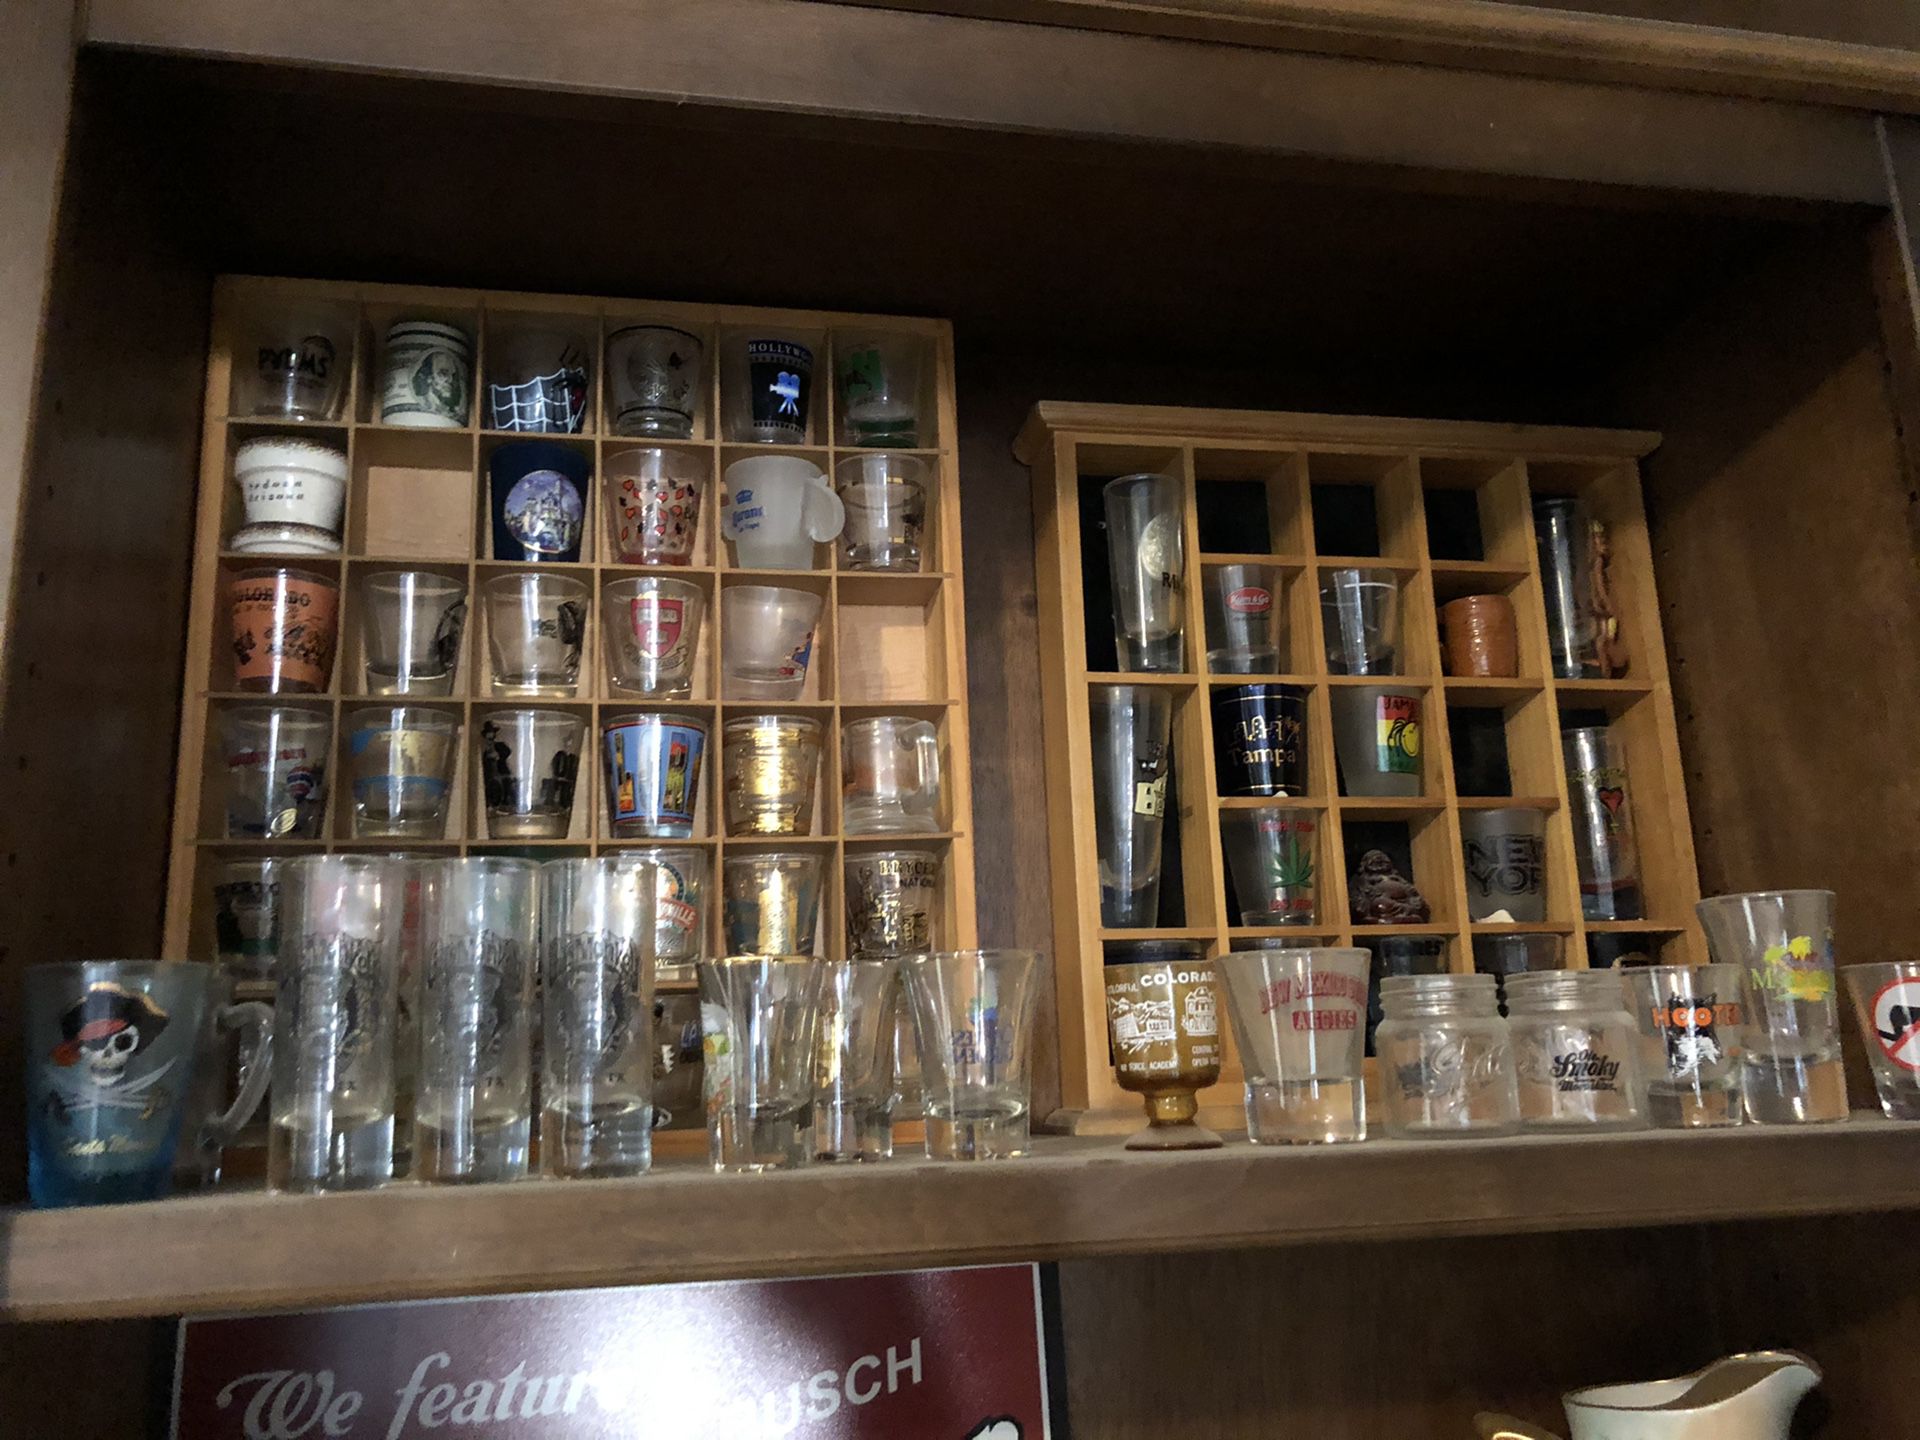 Shot-glass collection with multiple displays